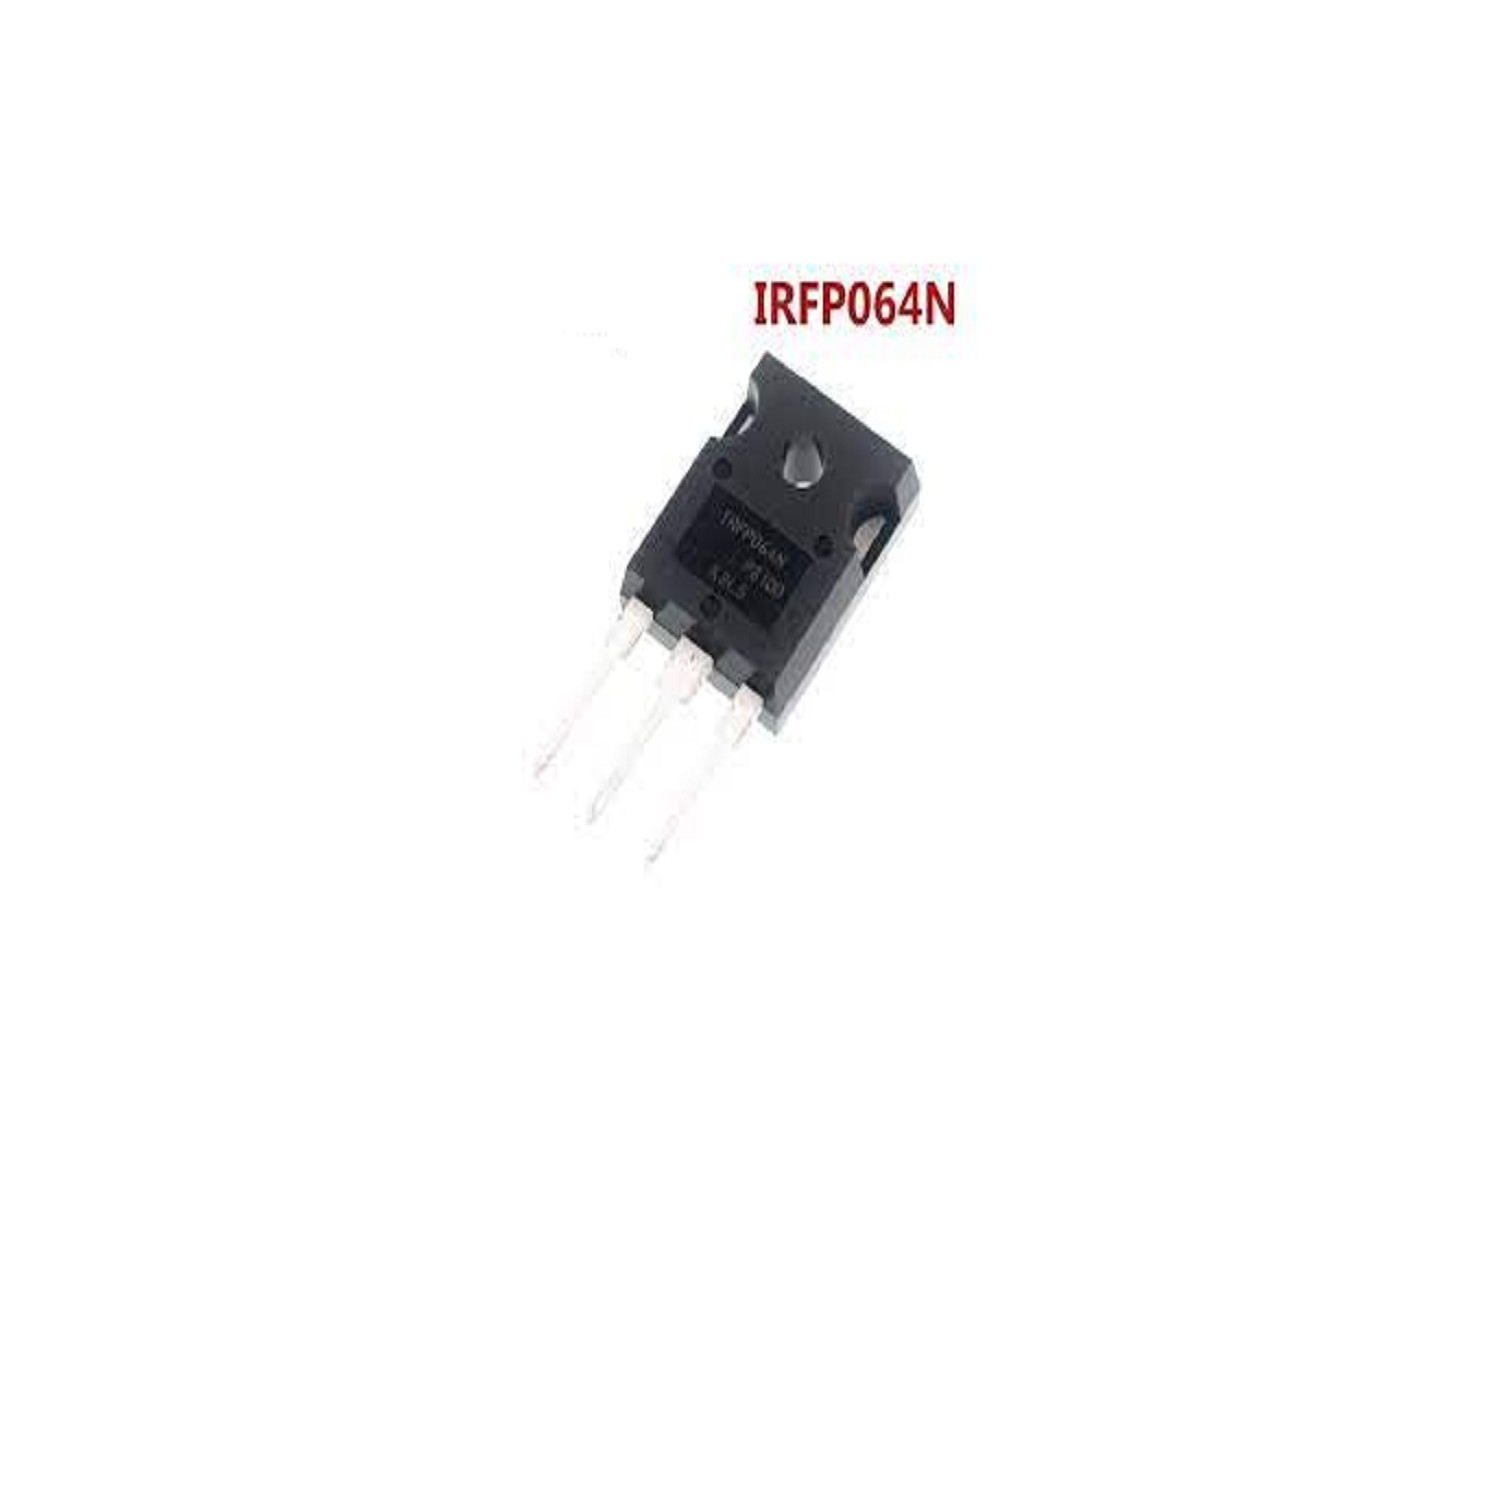 TRANSISTOR FET IRFP 064NP Power MOSFET(Vdss=55V, Rds(on)=0.008ohm, Id=110A?)